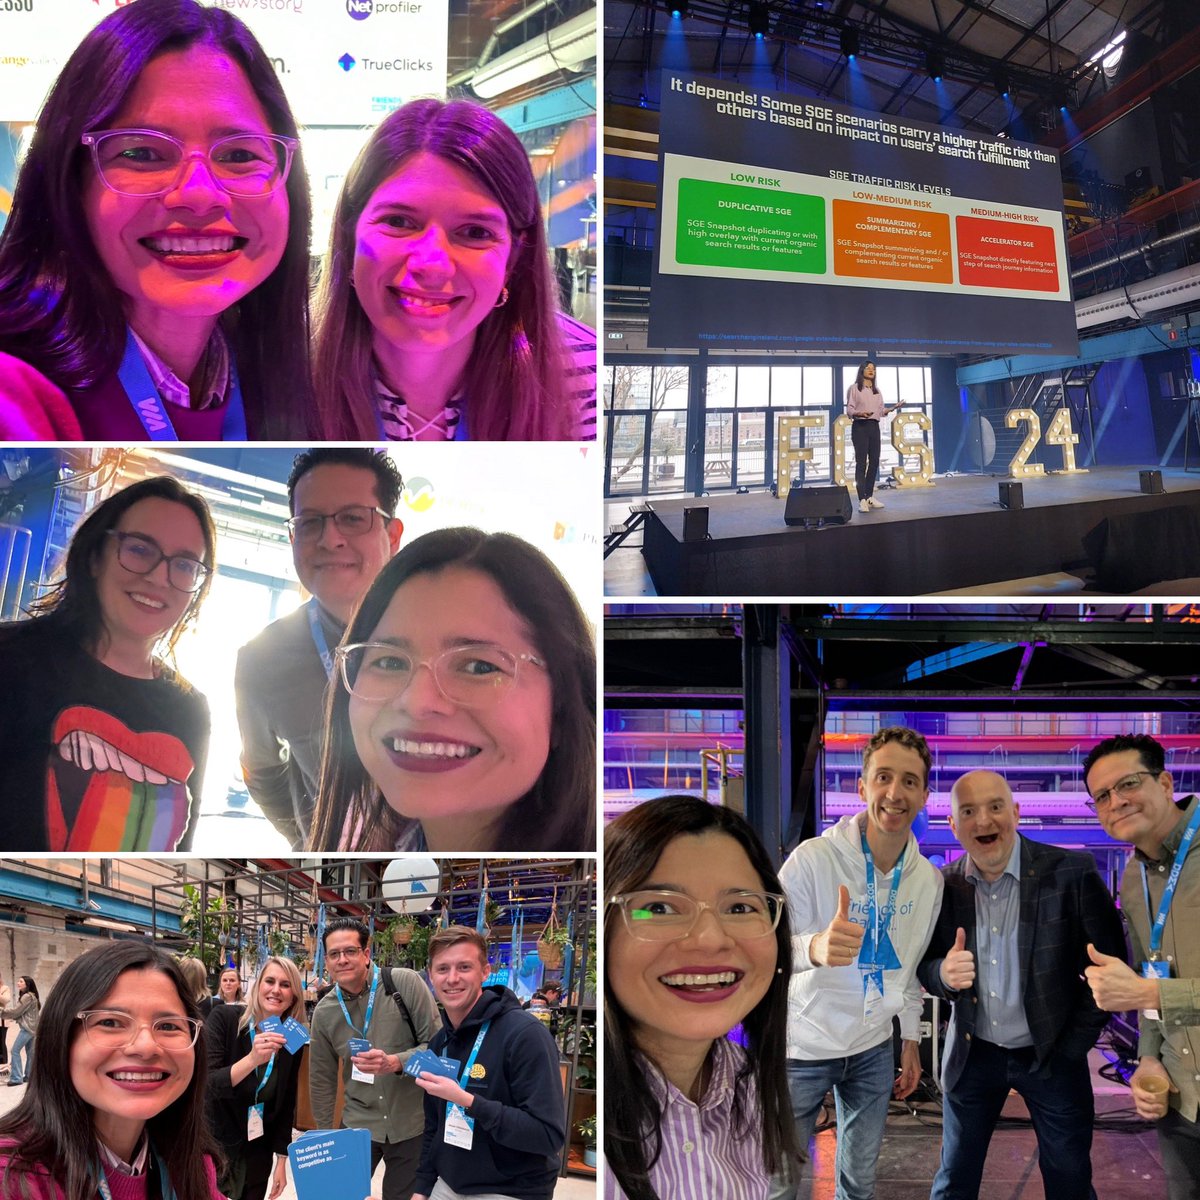 What an awesome experience speaking at #FOS24 again, what an excellent event it is 🙌🤩 thanks so much for the opportunity to hang out with so many amazing SEOs and friends🙏